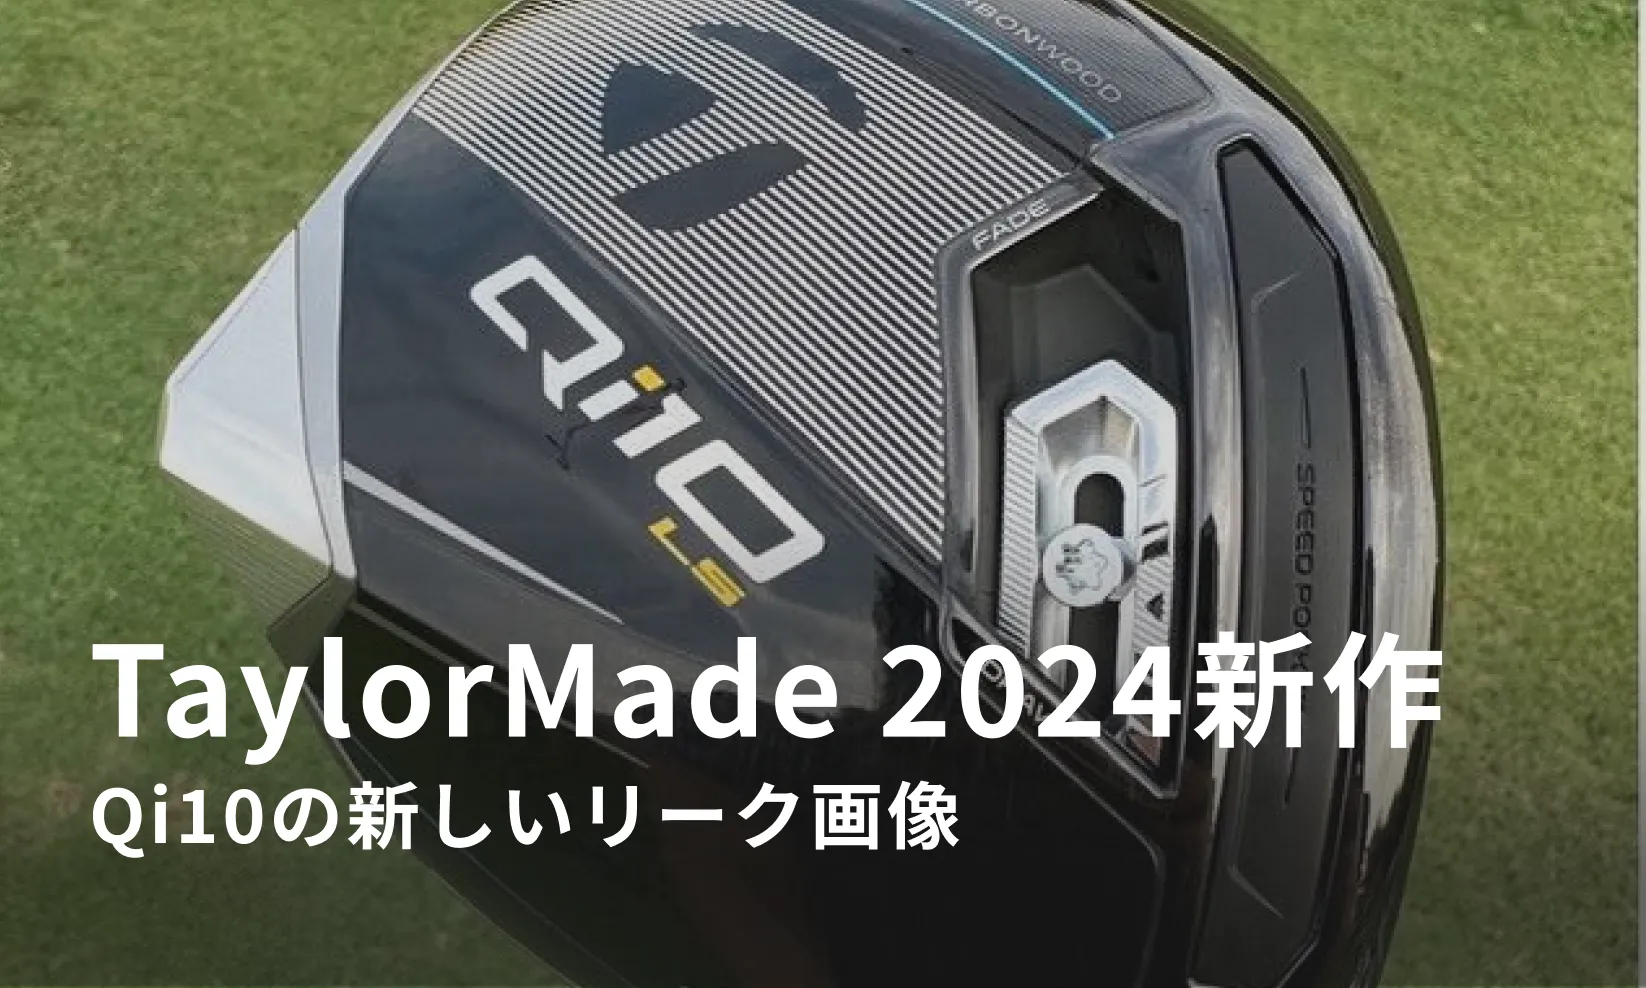 Taylormade 2024new